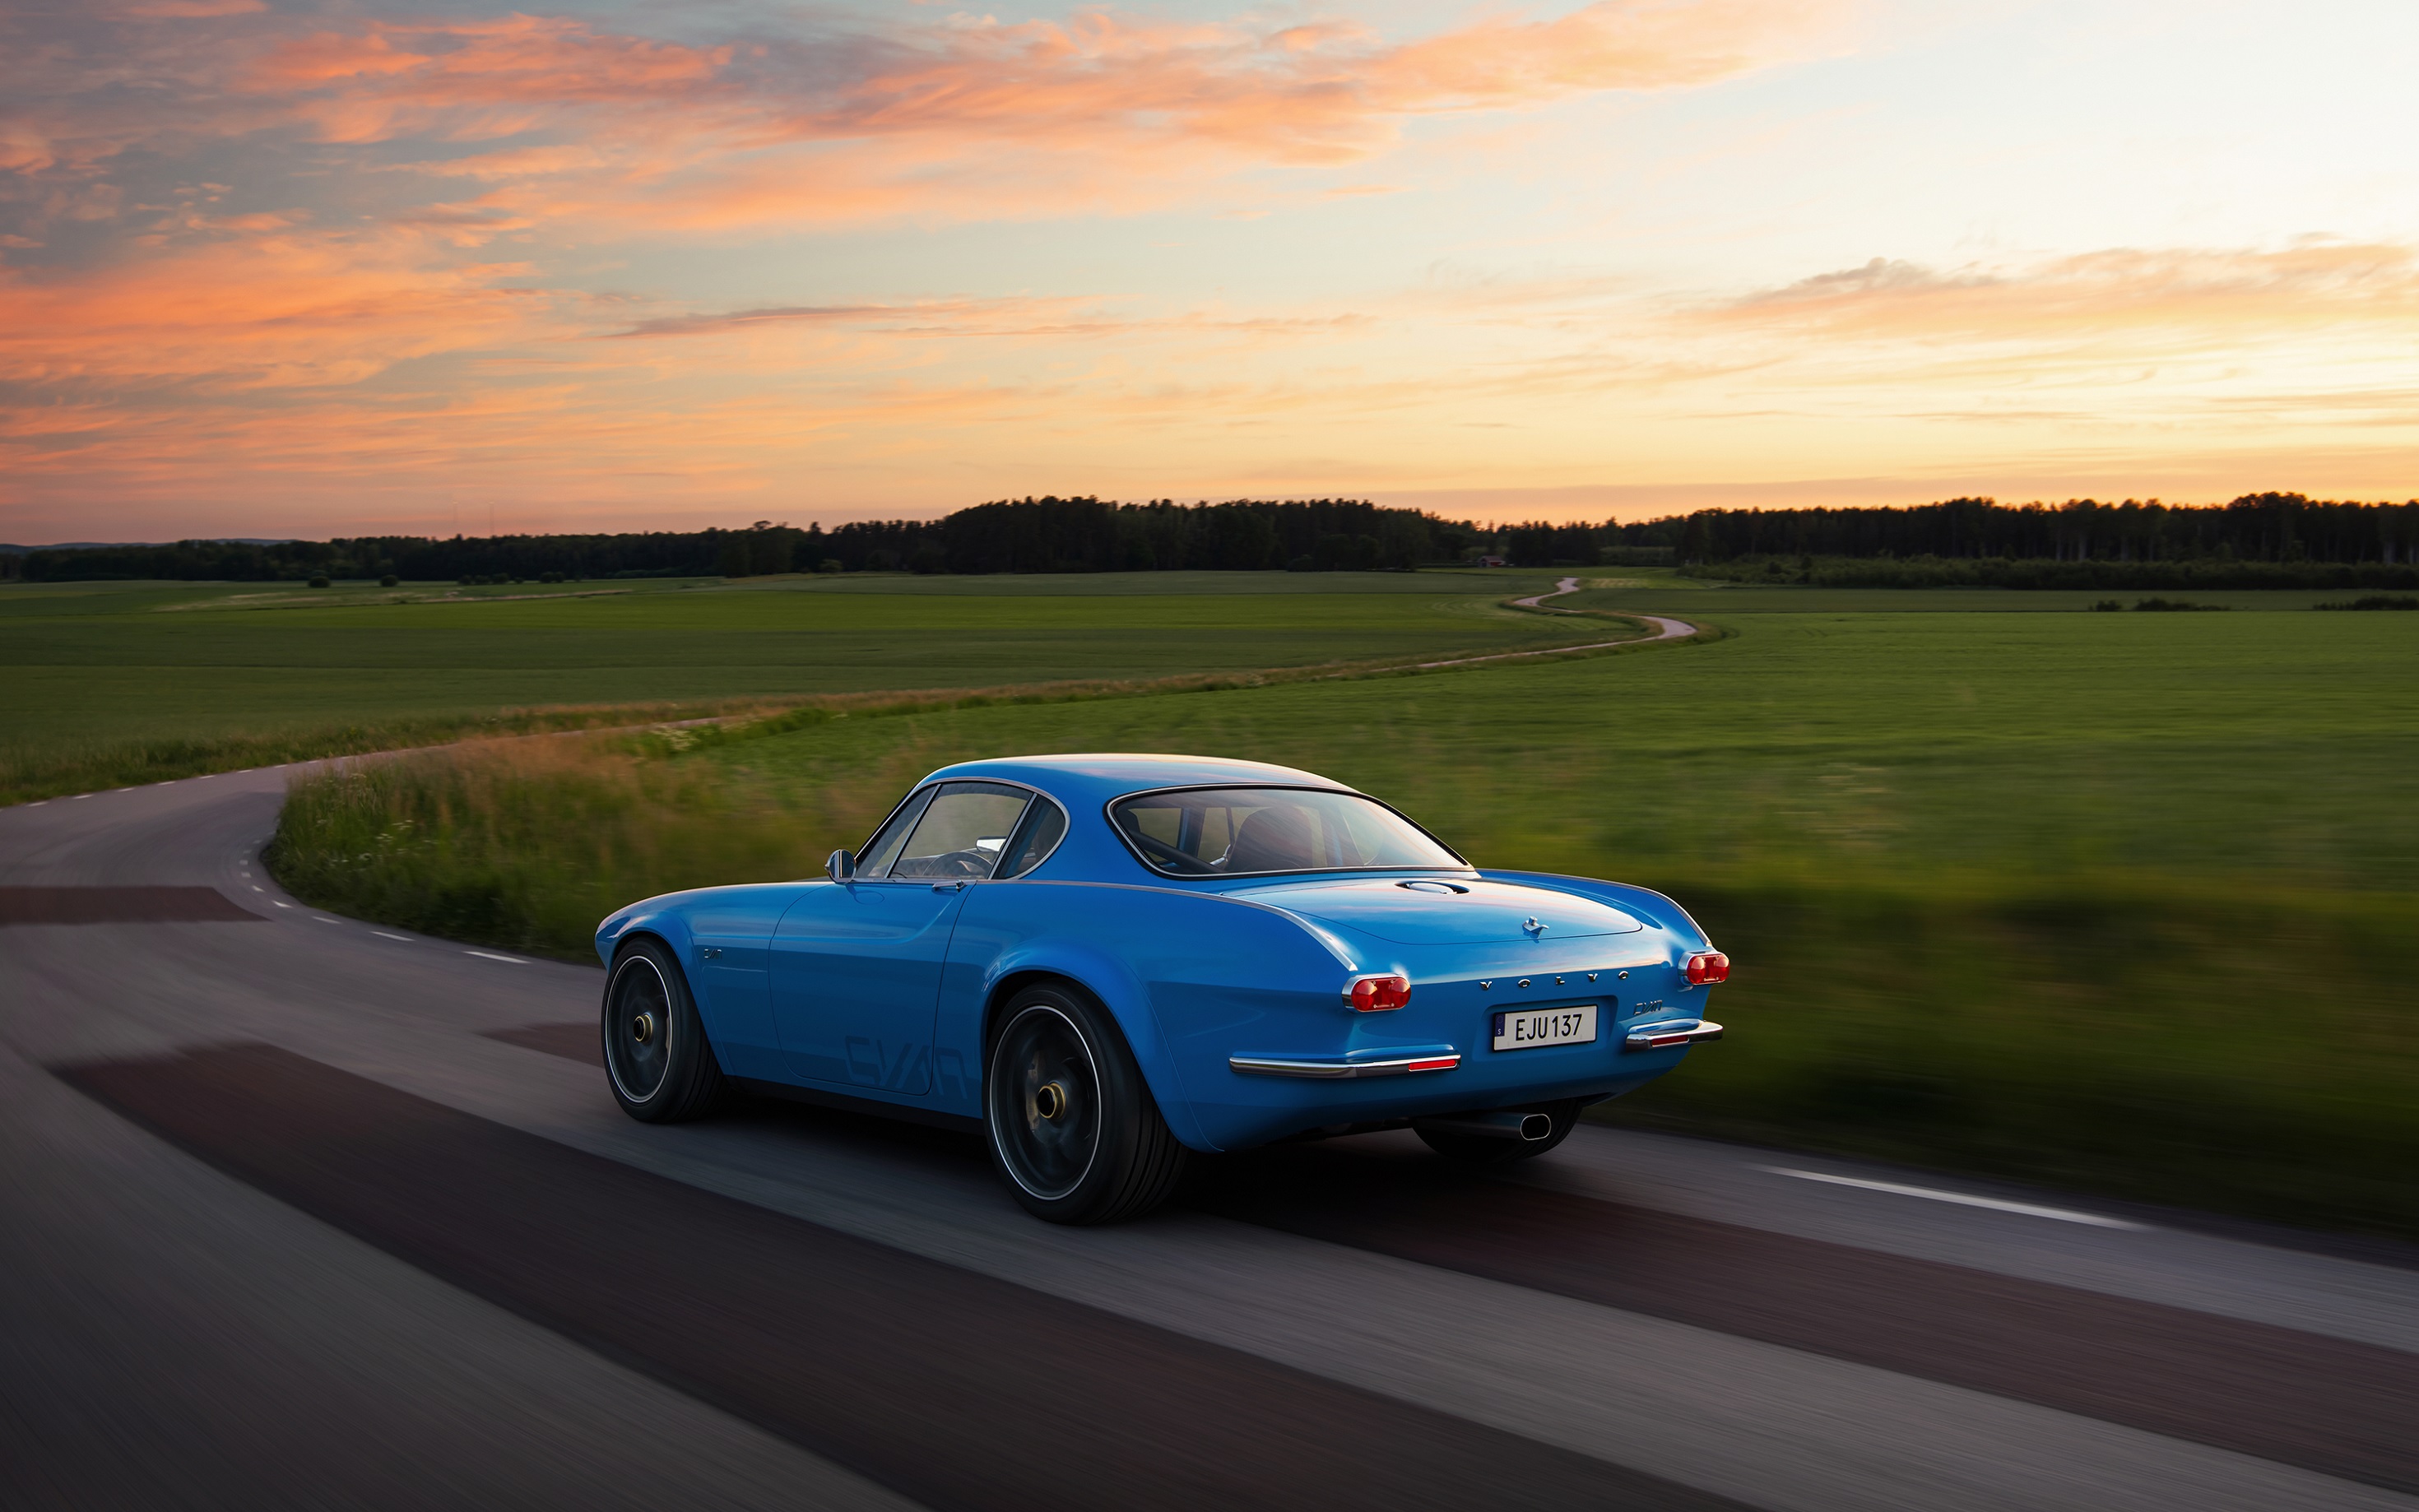 The rear 3/4 view of a blue Volvo P1800 Cyan driving down a country road